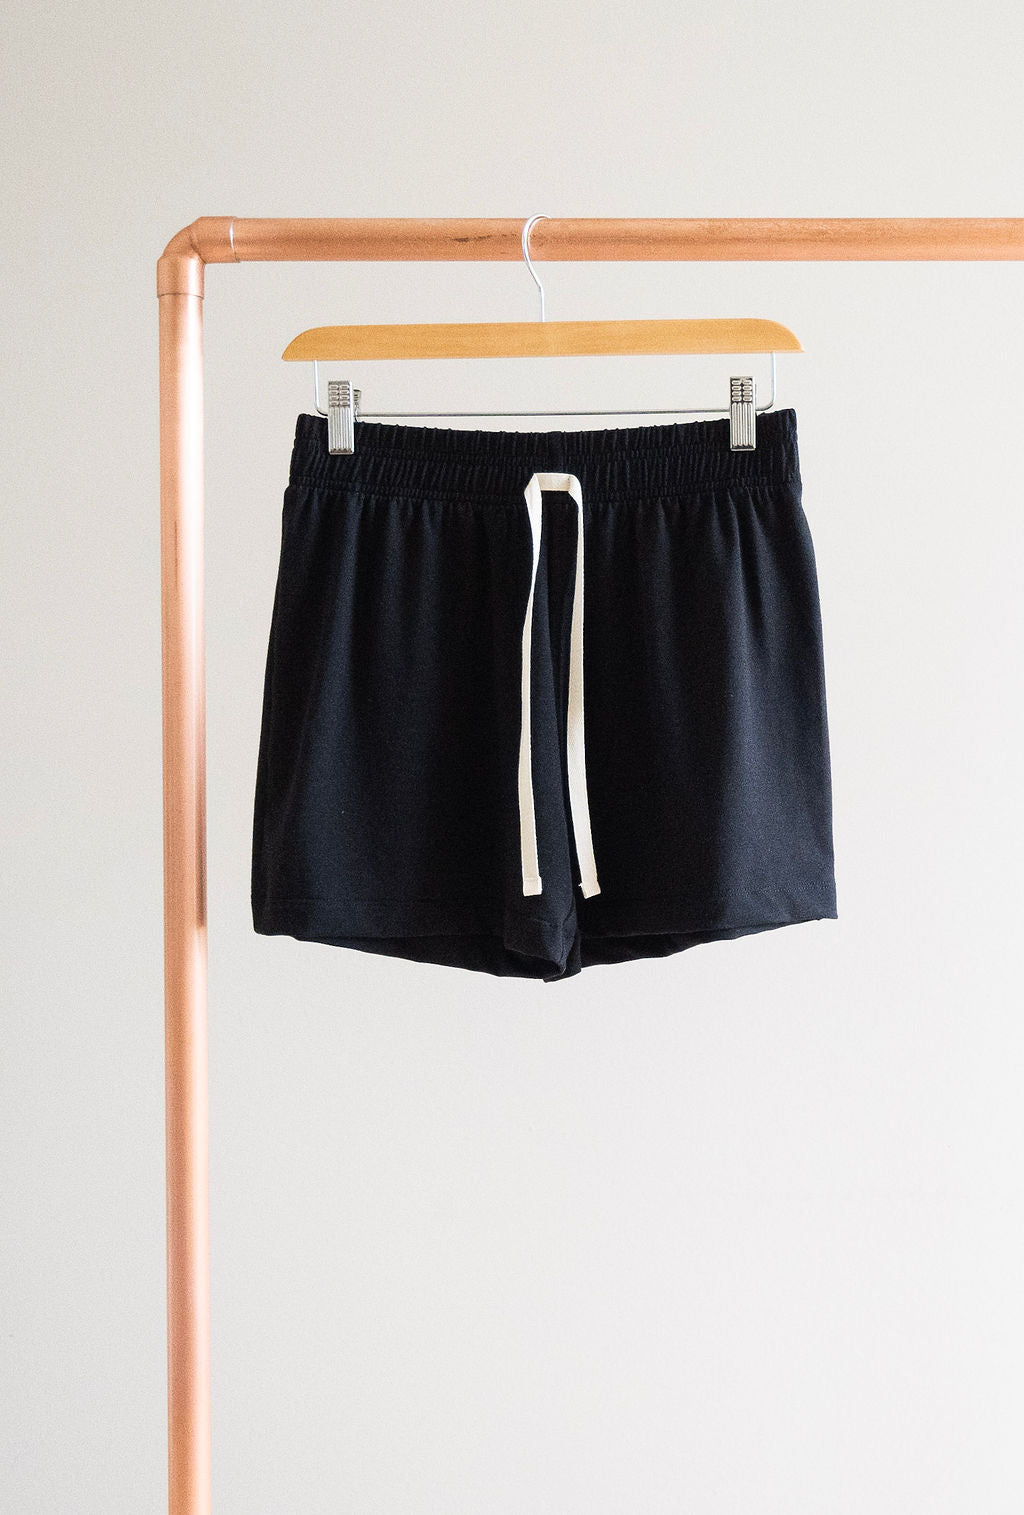 Travelers:  Ladies High Waisted Shorts